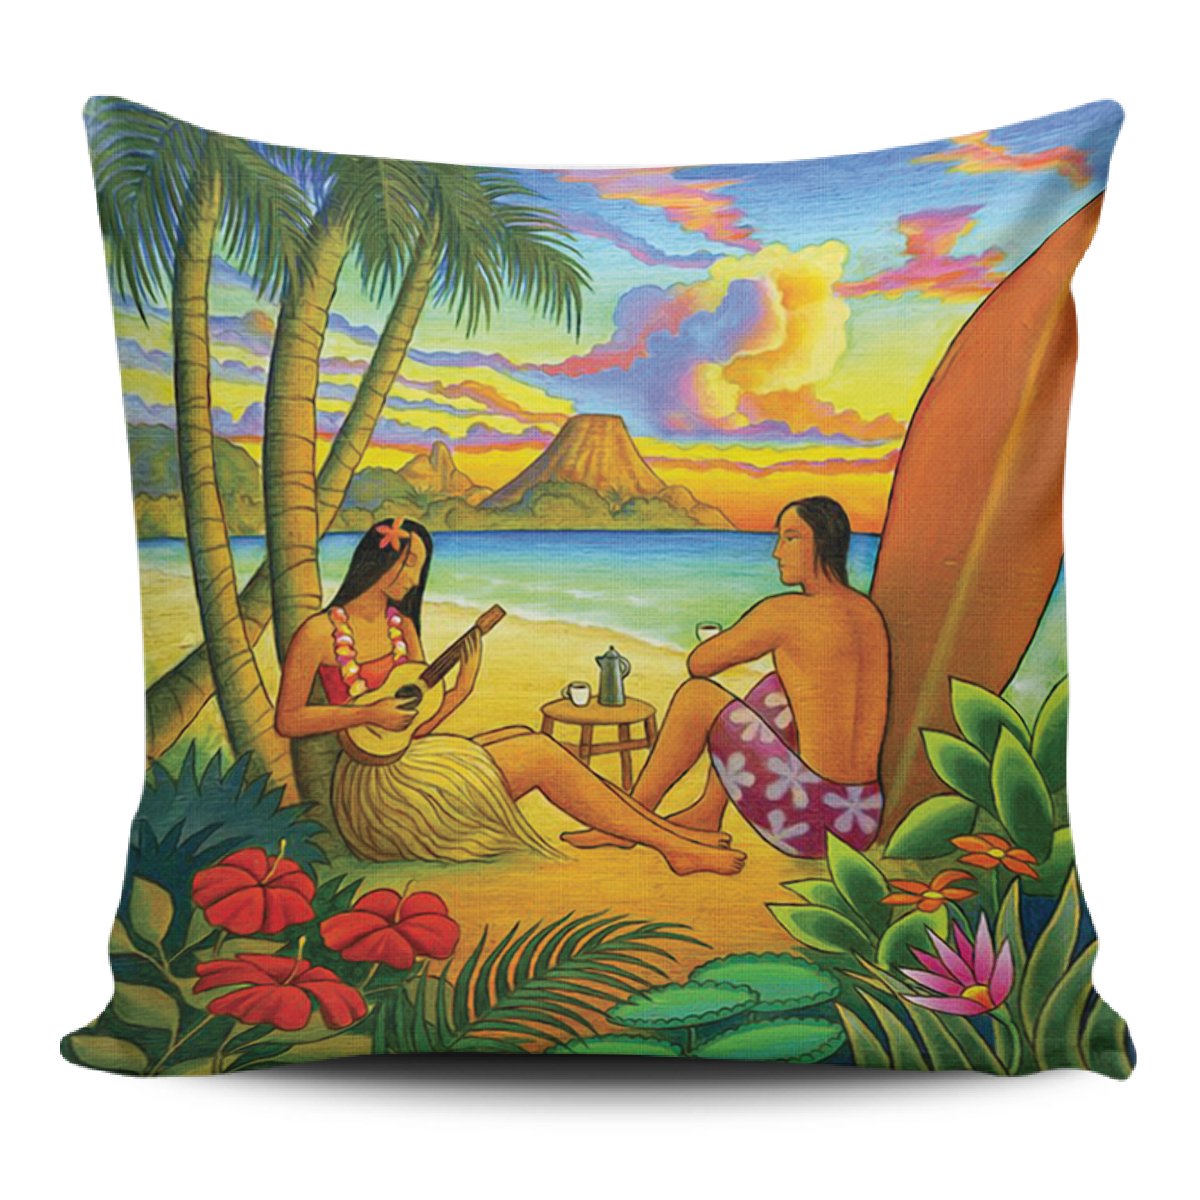 Sing A Song On A Beach Pillow Covers One Size Zippered Pillow Case 18"x18"(Twin Sides) Black - Polynesian Pride